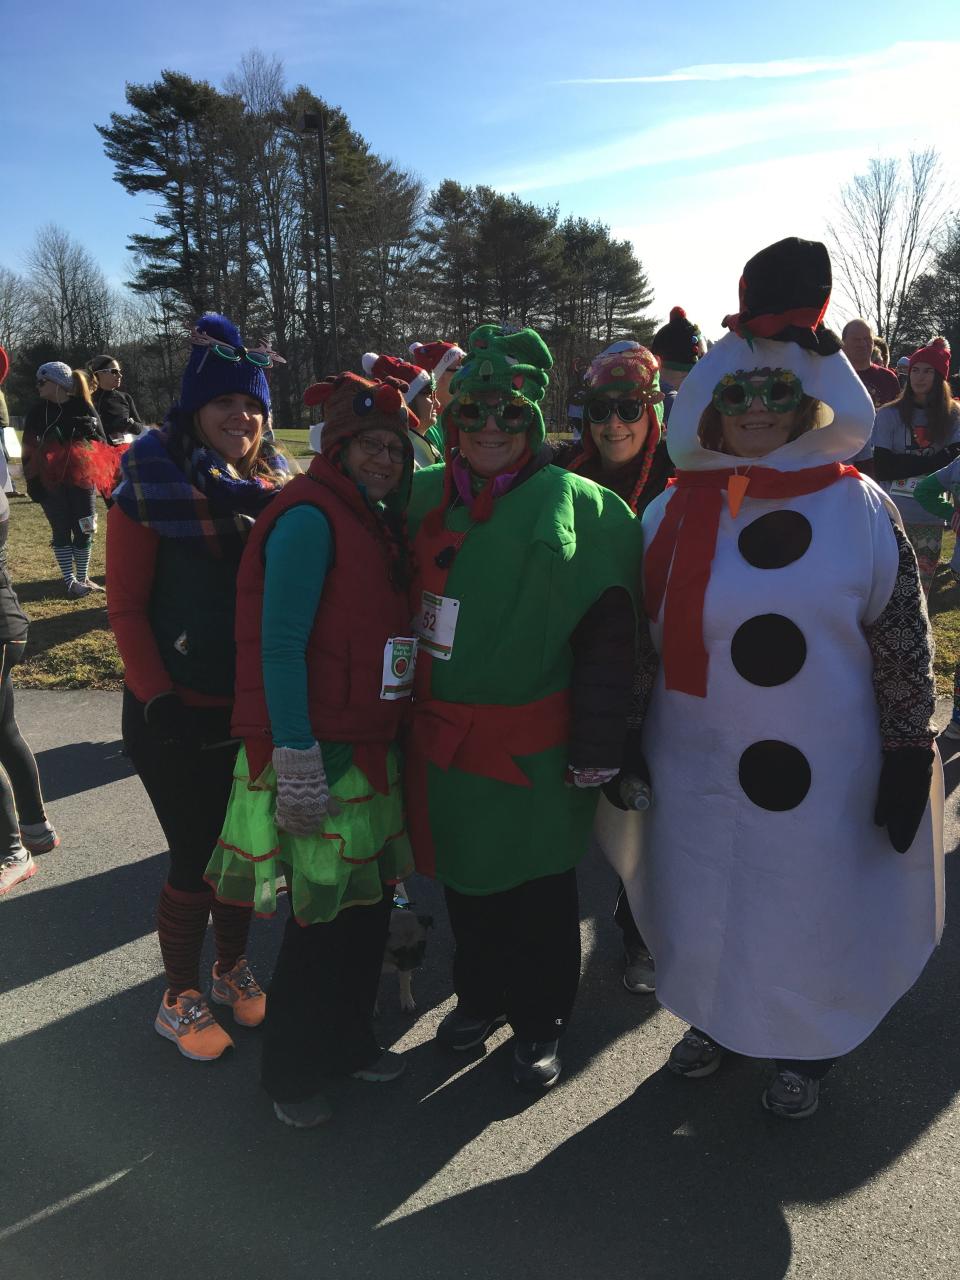 Here's a group gathered for a past Jingle Bell Run hosted by the Arthritis Foundation.